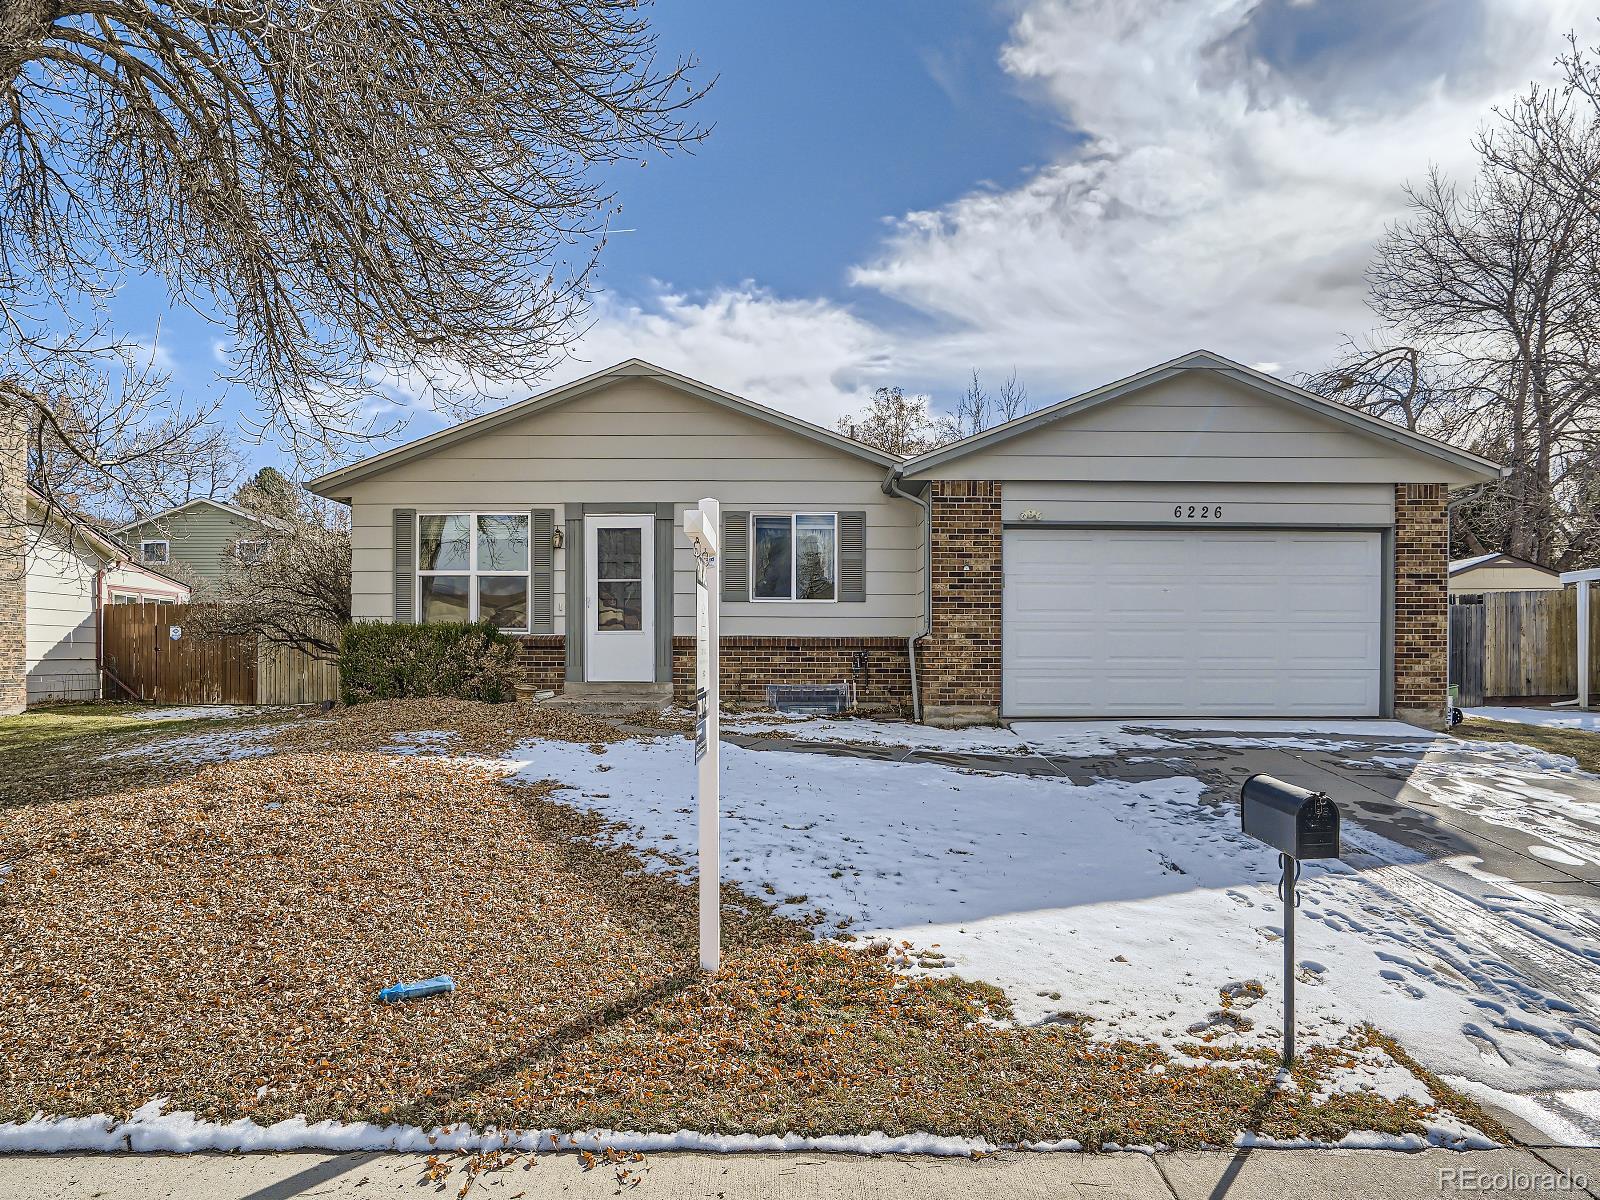 6226 w 75th place, arvada sold home. Closed on 2024-01-10 for $515,000.